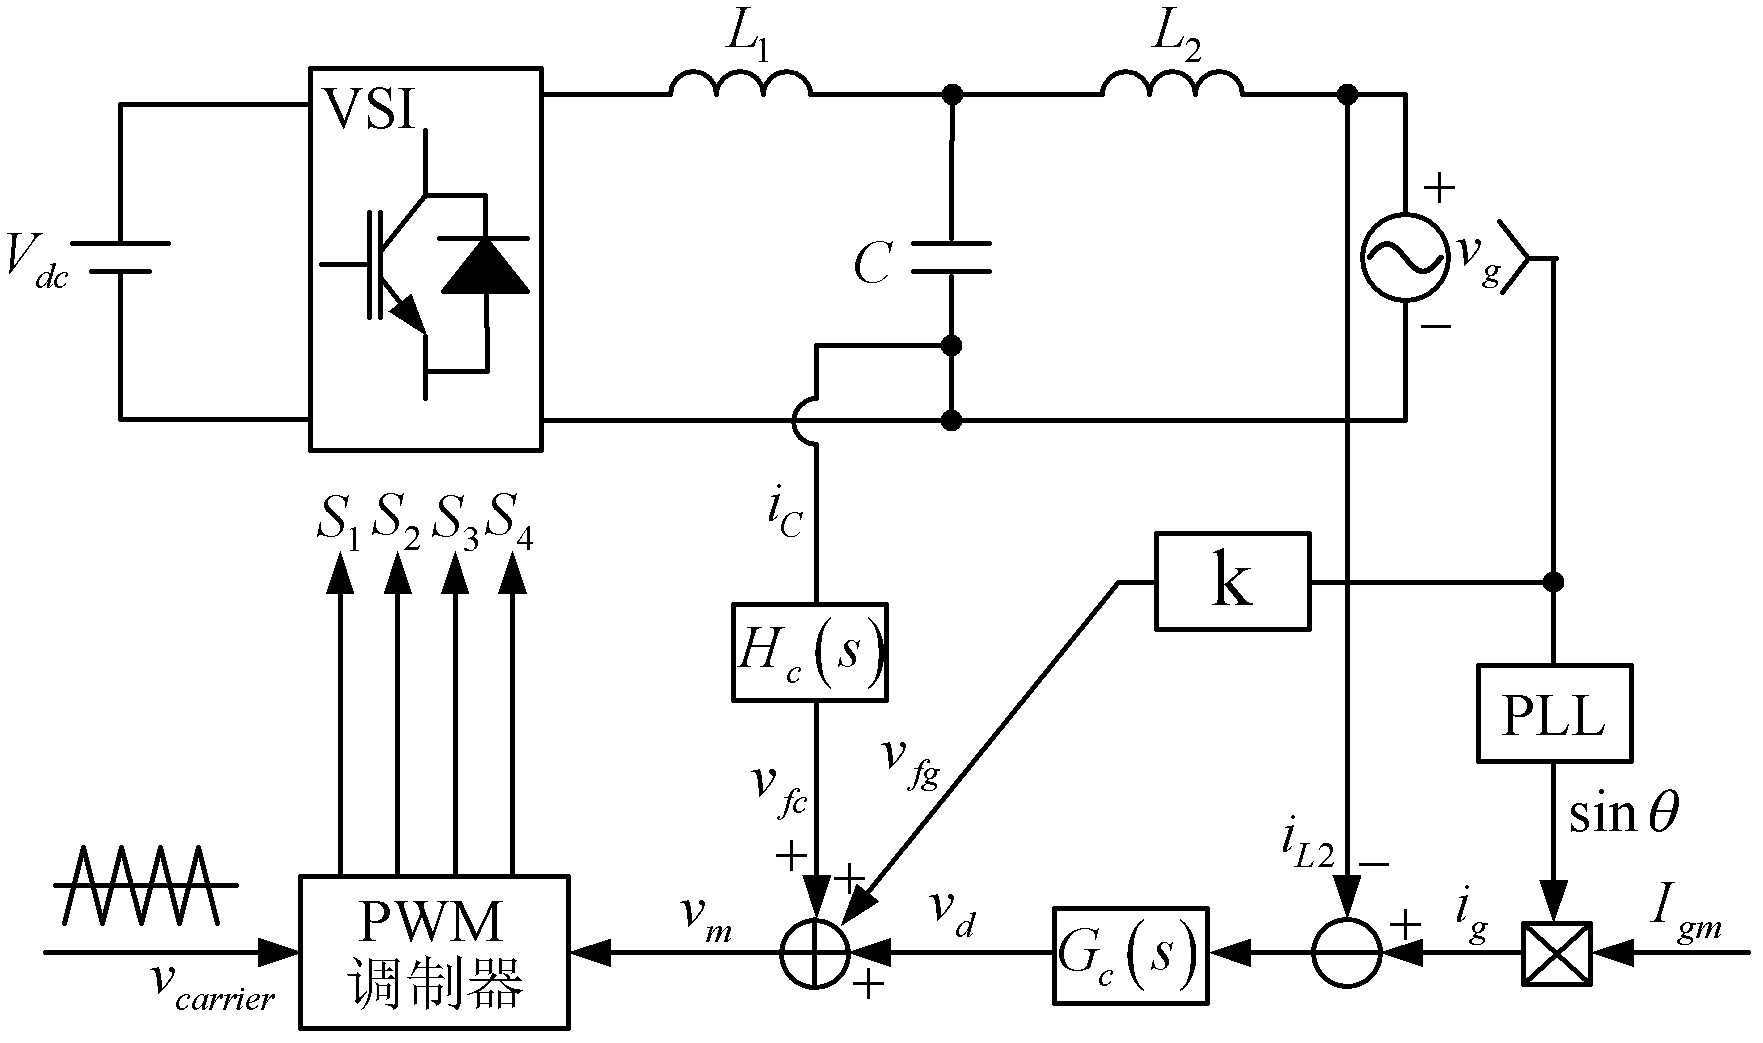 Method for controlling grid-connected inverter based on feed-forward compensation